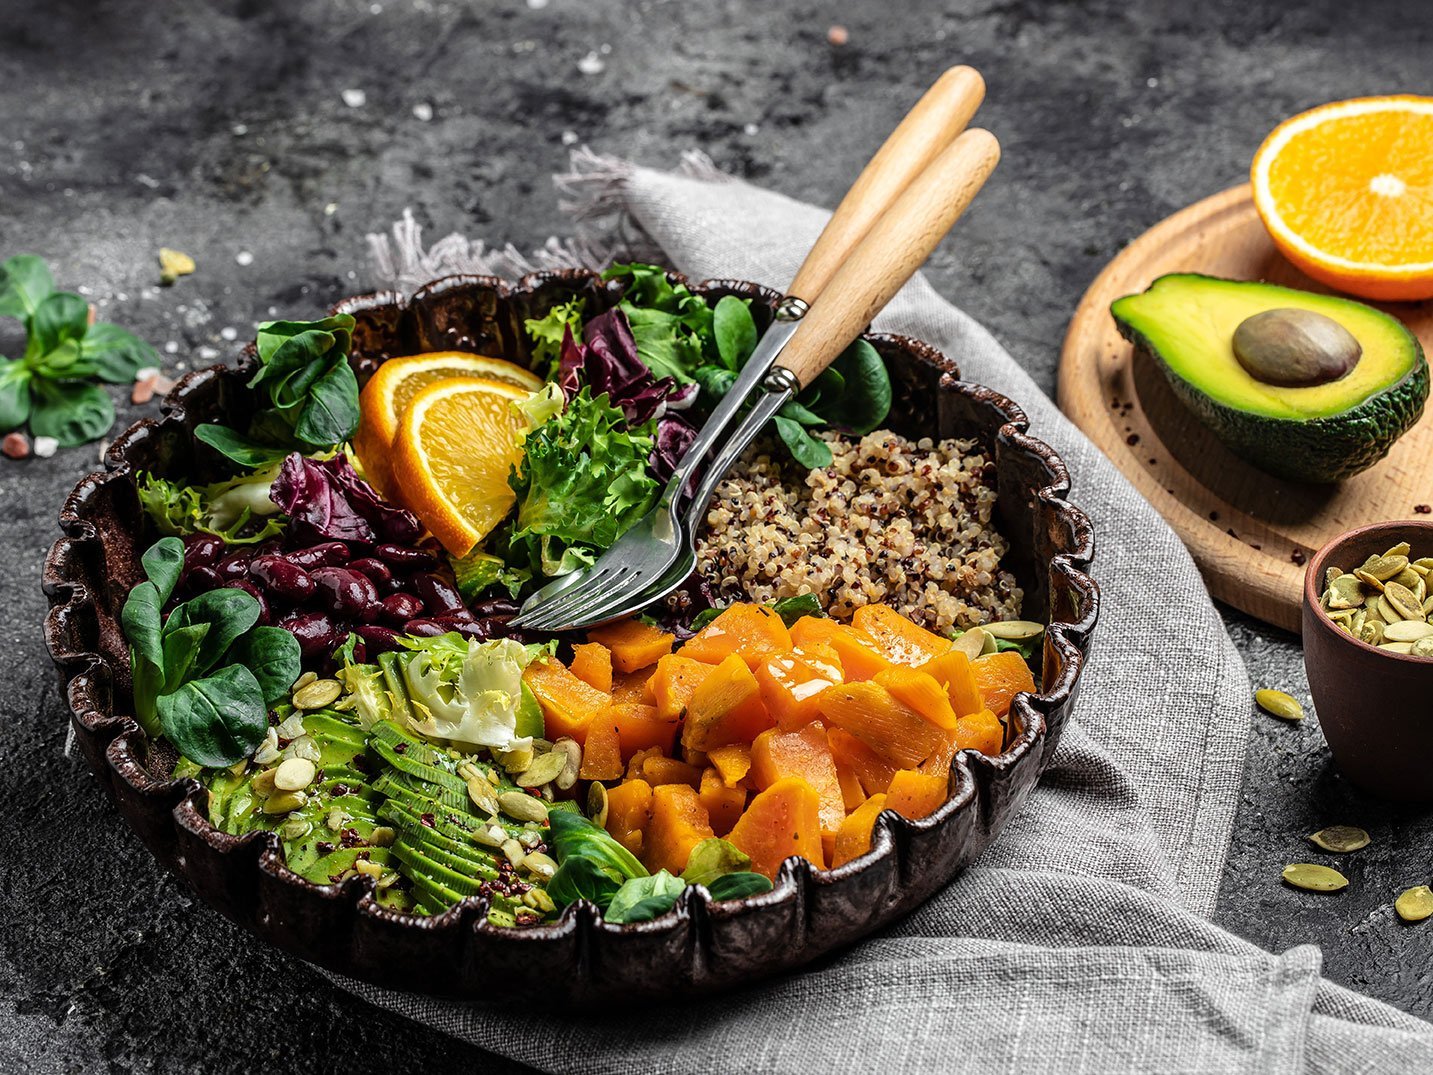 Quinoa Salad In Bowl With Avocado, Sweet Potato, Beans On Gray Background. Superfood Concept. Healthy, Clean Eating Concept. Vegan Or Gluten Free Diet. Top View